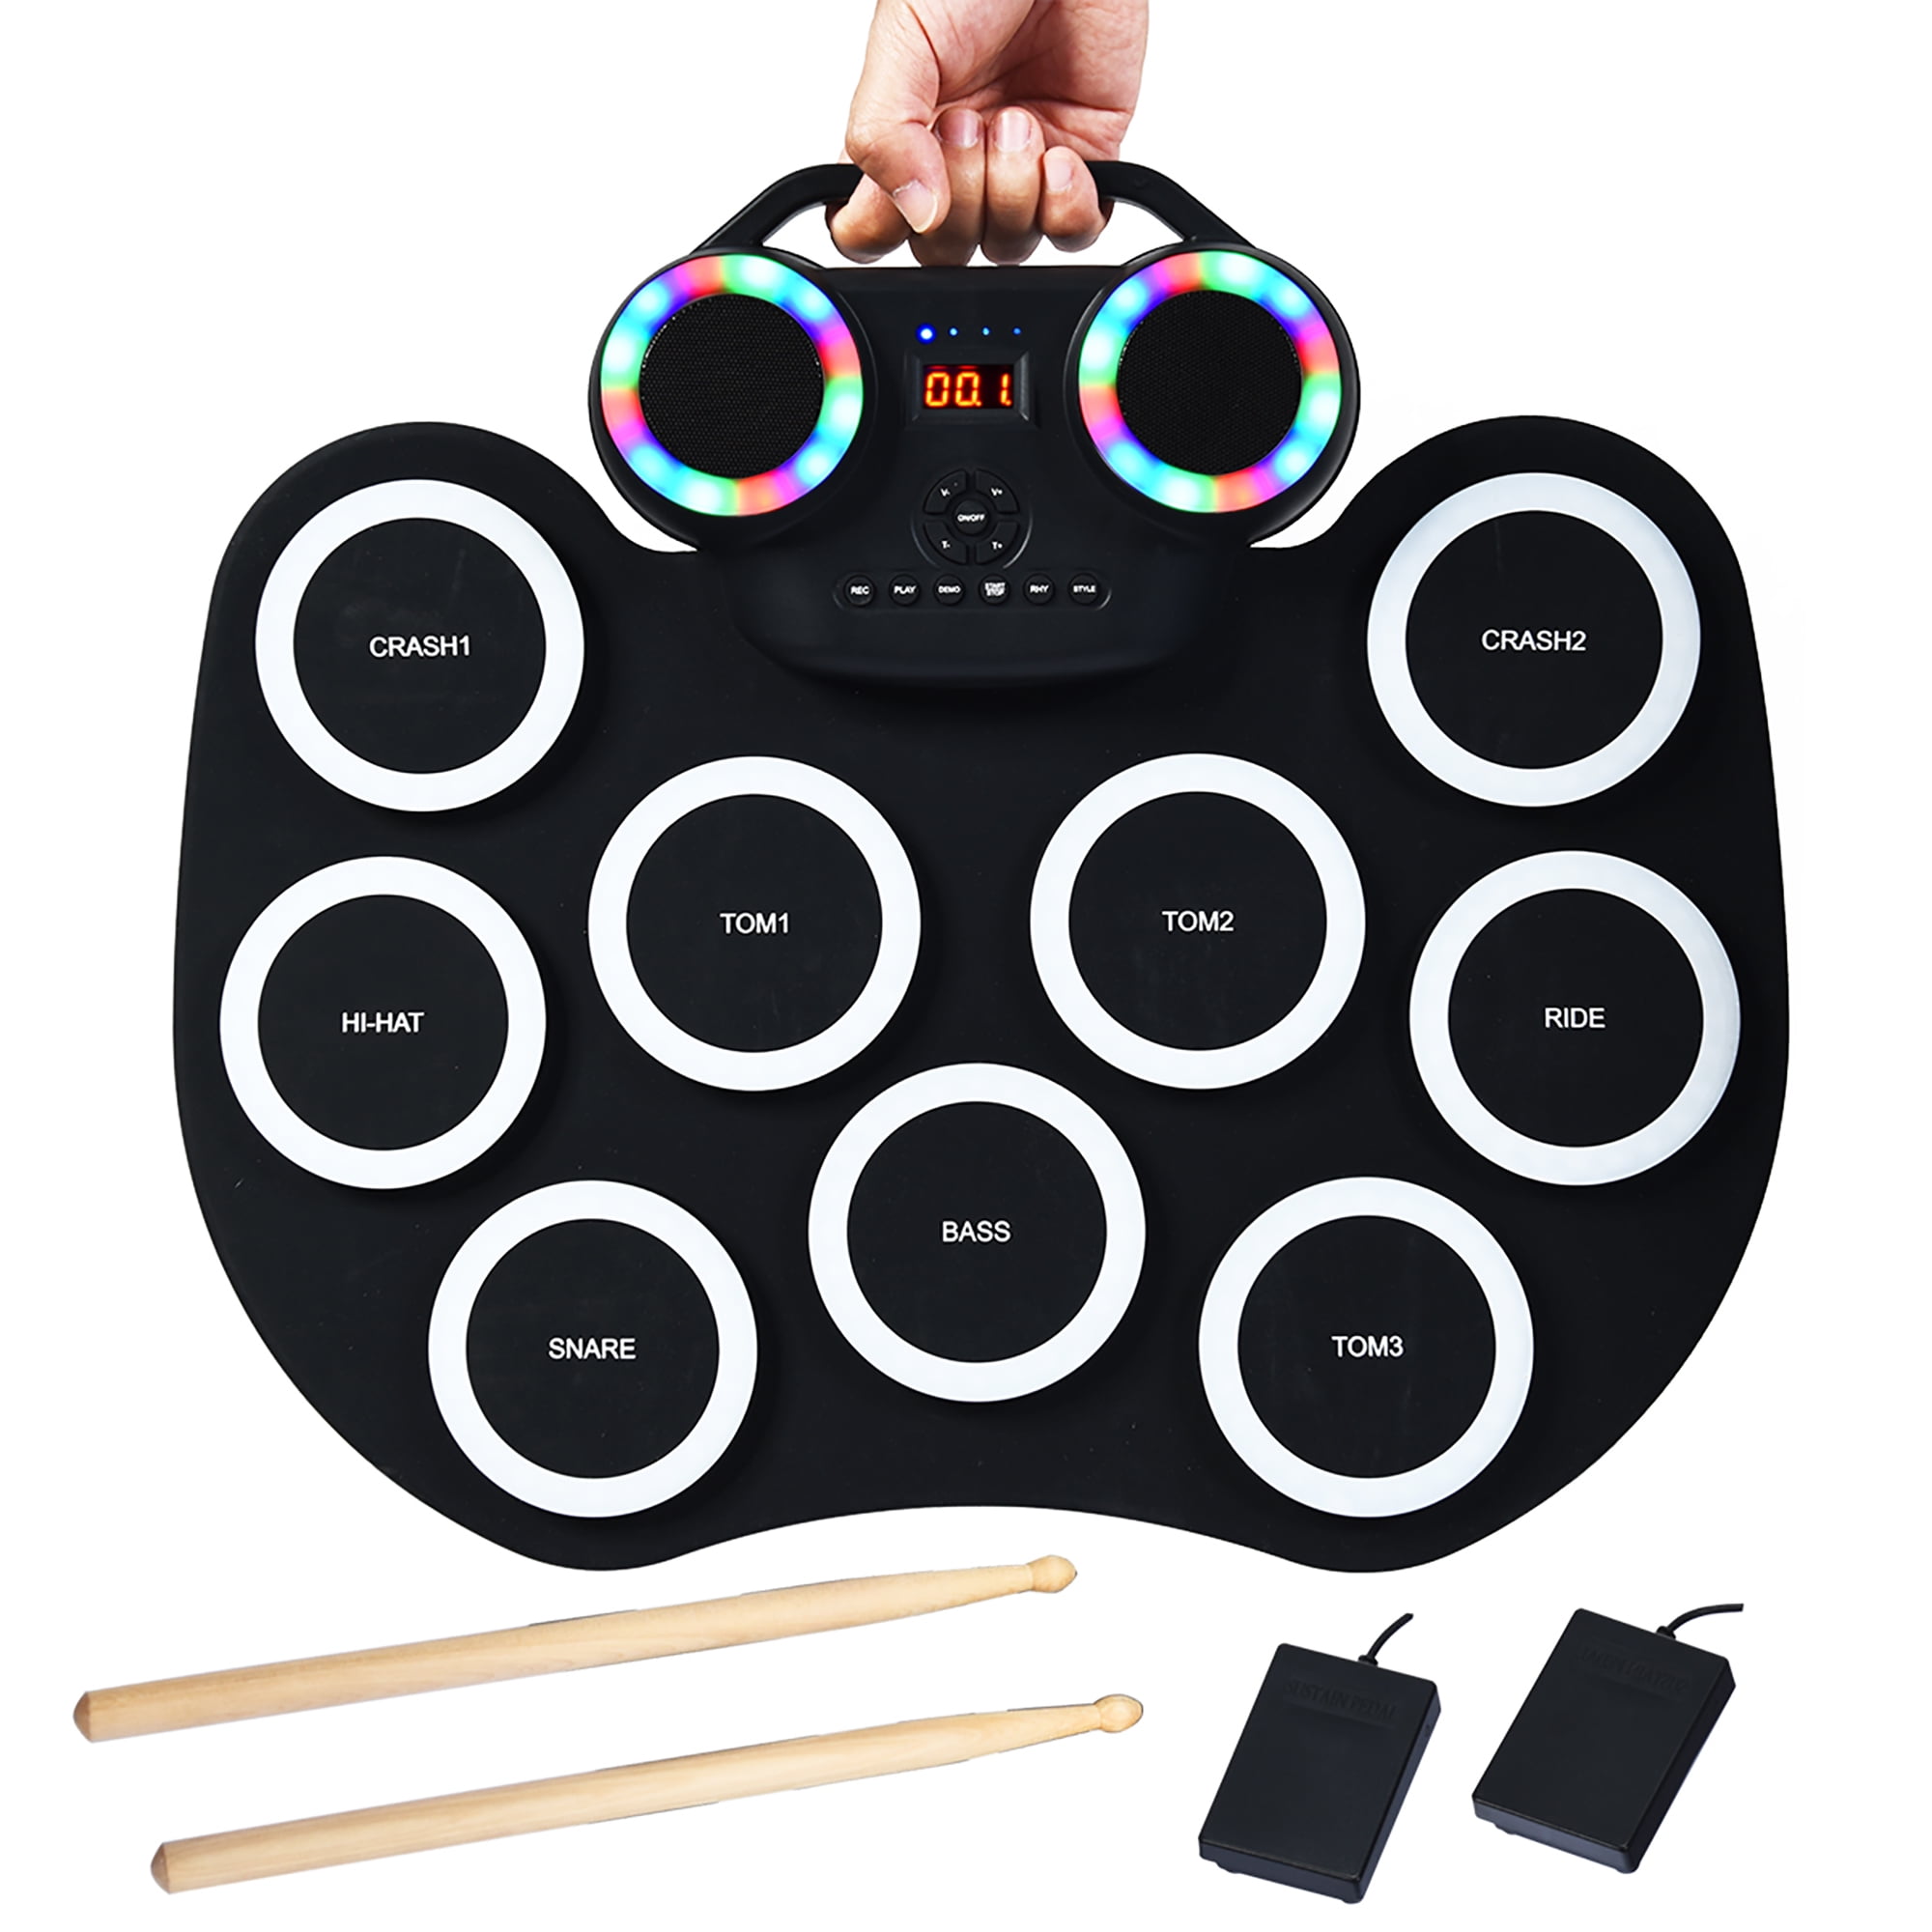 7 Tones & Rhythms Black 2 Built-in Speakers Foot Pedals Costzon 9 Pads Electronic Roll up Drum with LED Light for Beginners Kids MIDI 10 Demos Portable Drum Kit w/Bluetooth 